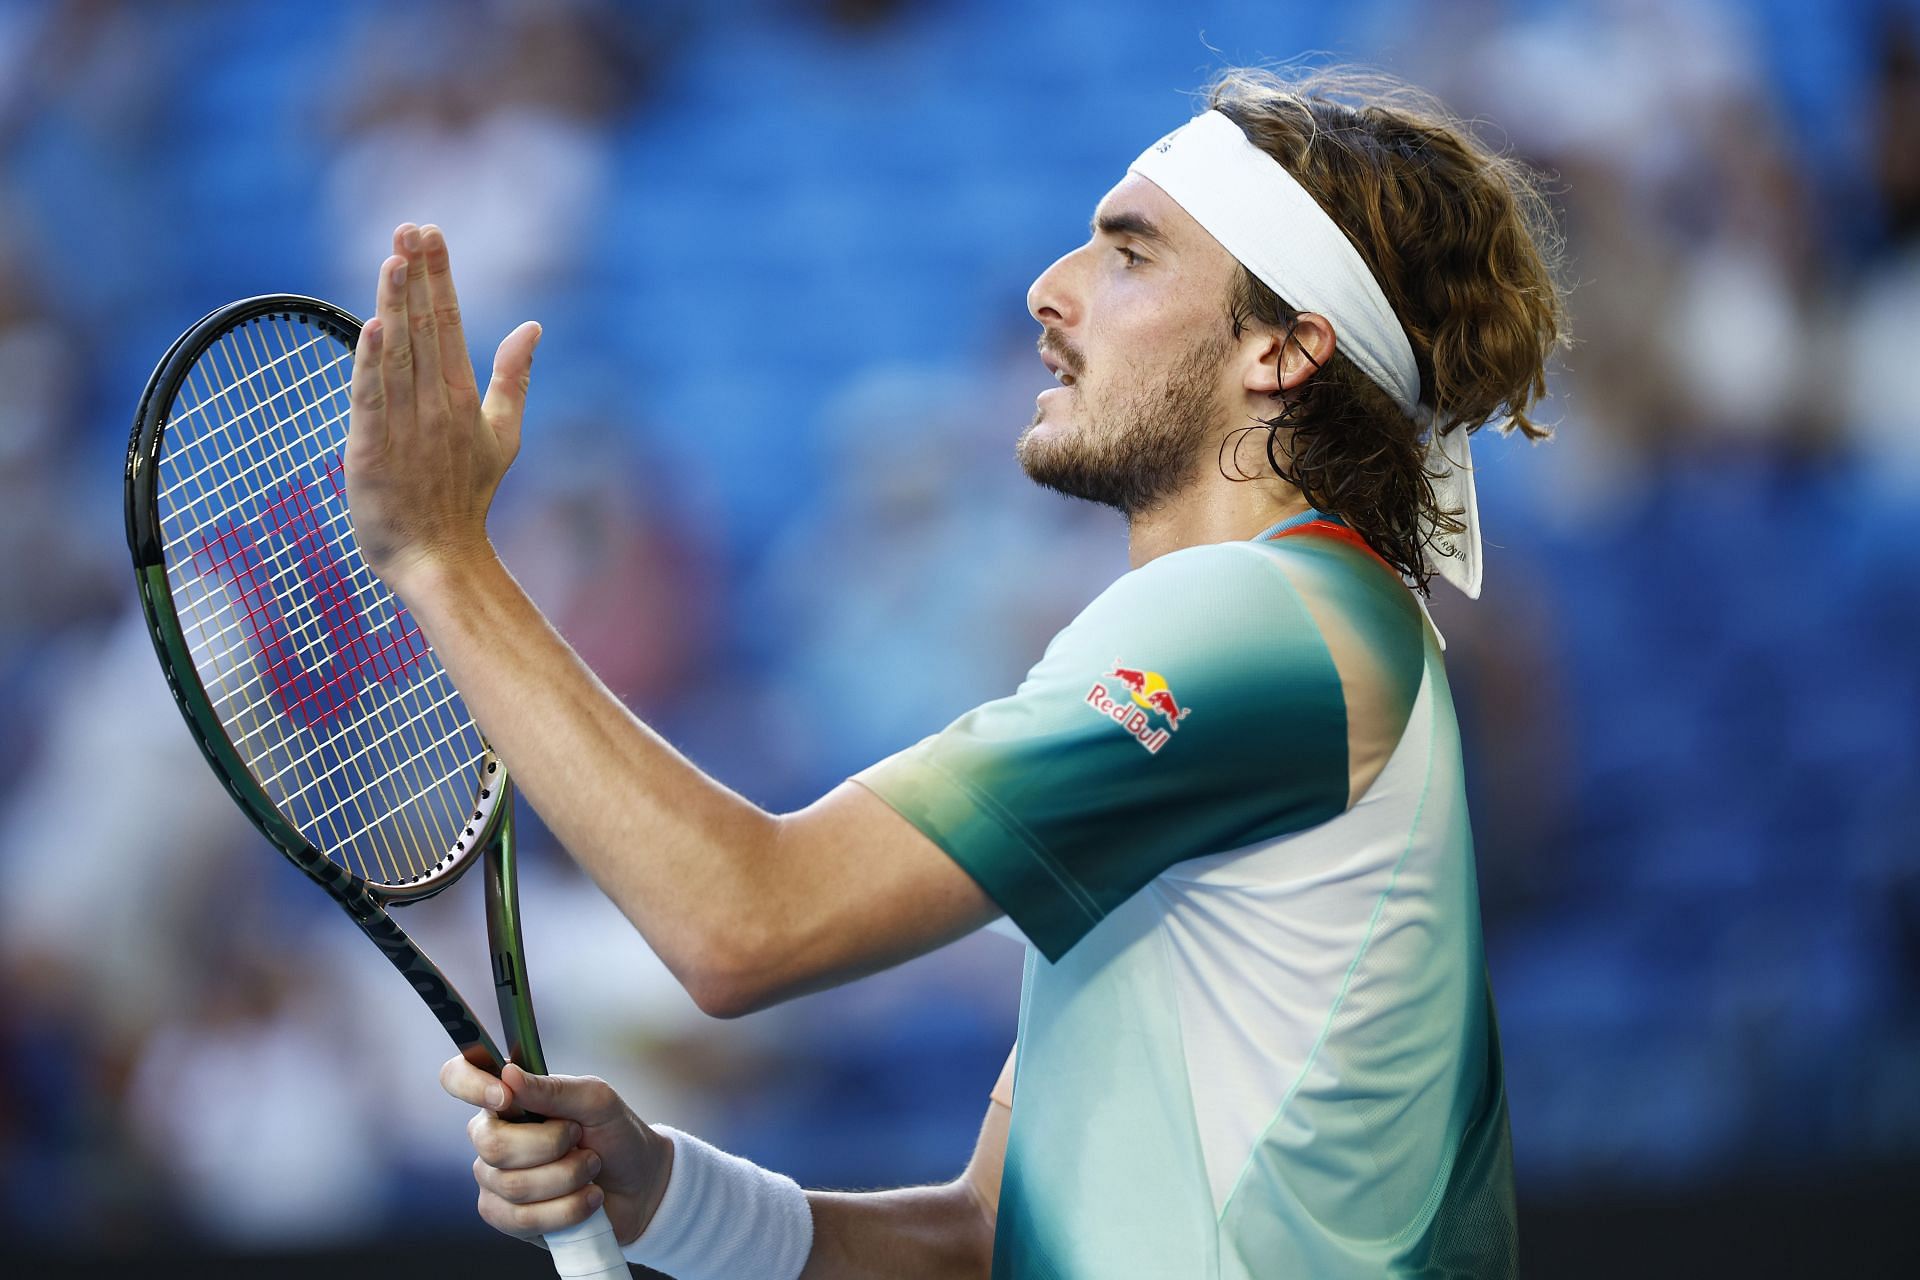 Stefanos Tsitsipas acknowledges the crowd after his third-round win at 2022 Australian Open